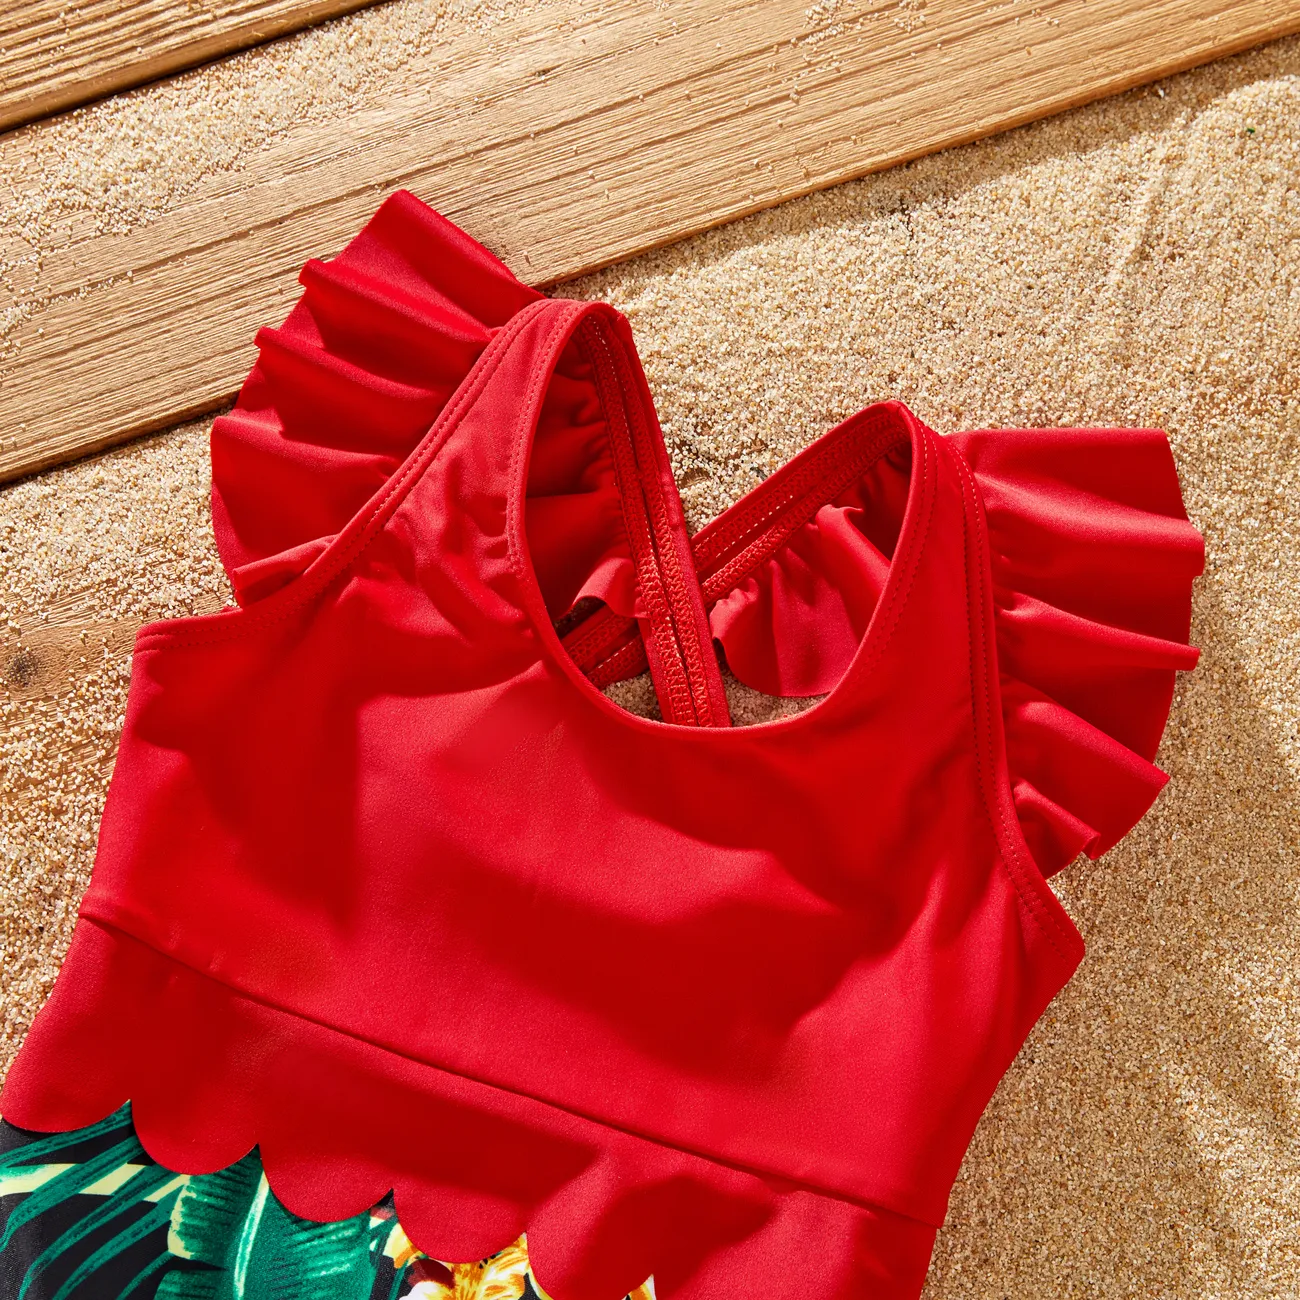 Family Matching Floral Drawstring Swim Trunks or Red Halter Top Spliced Swimsuit Red big image 1